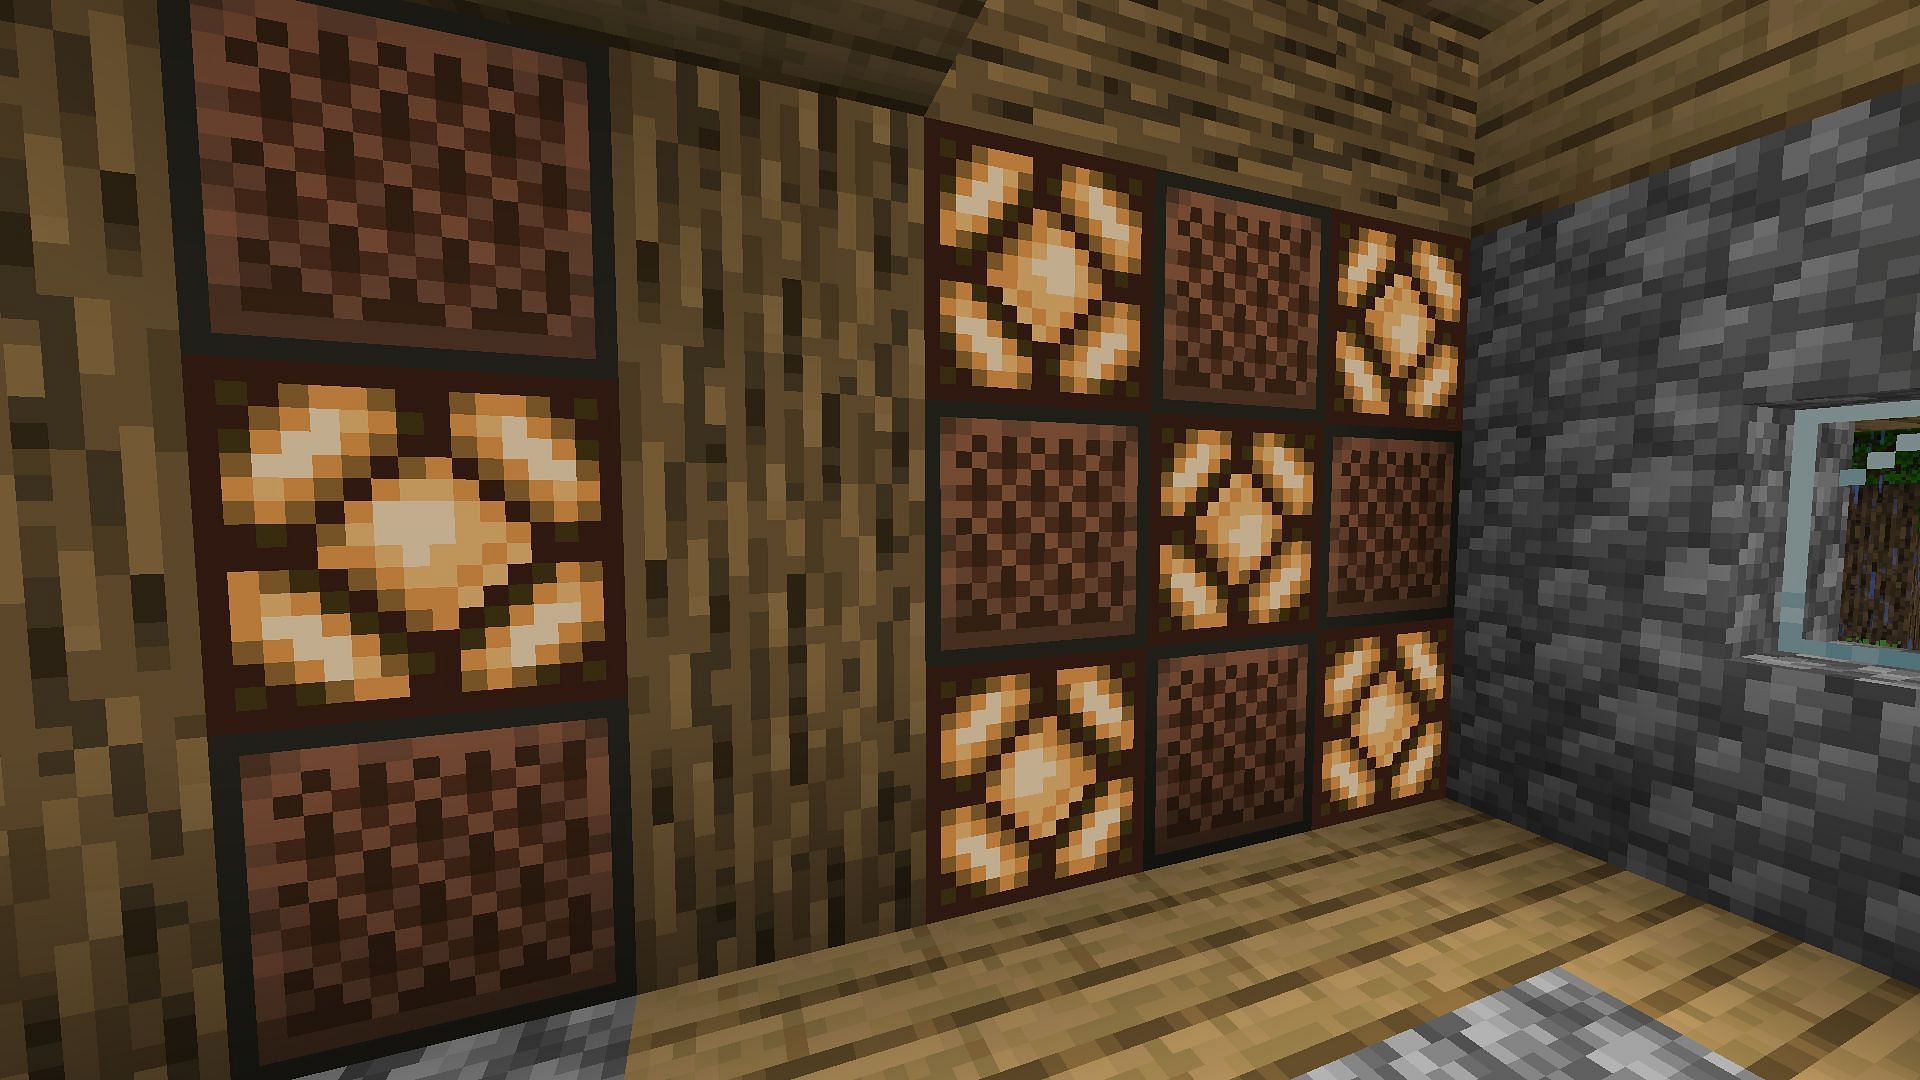 Redstone lamps and note blocks have unique features and textures for walls in Minecraft (Image via Mojang)